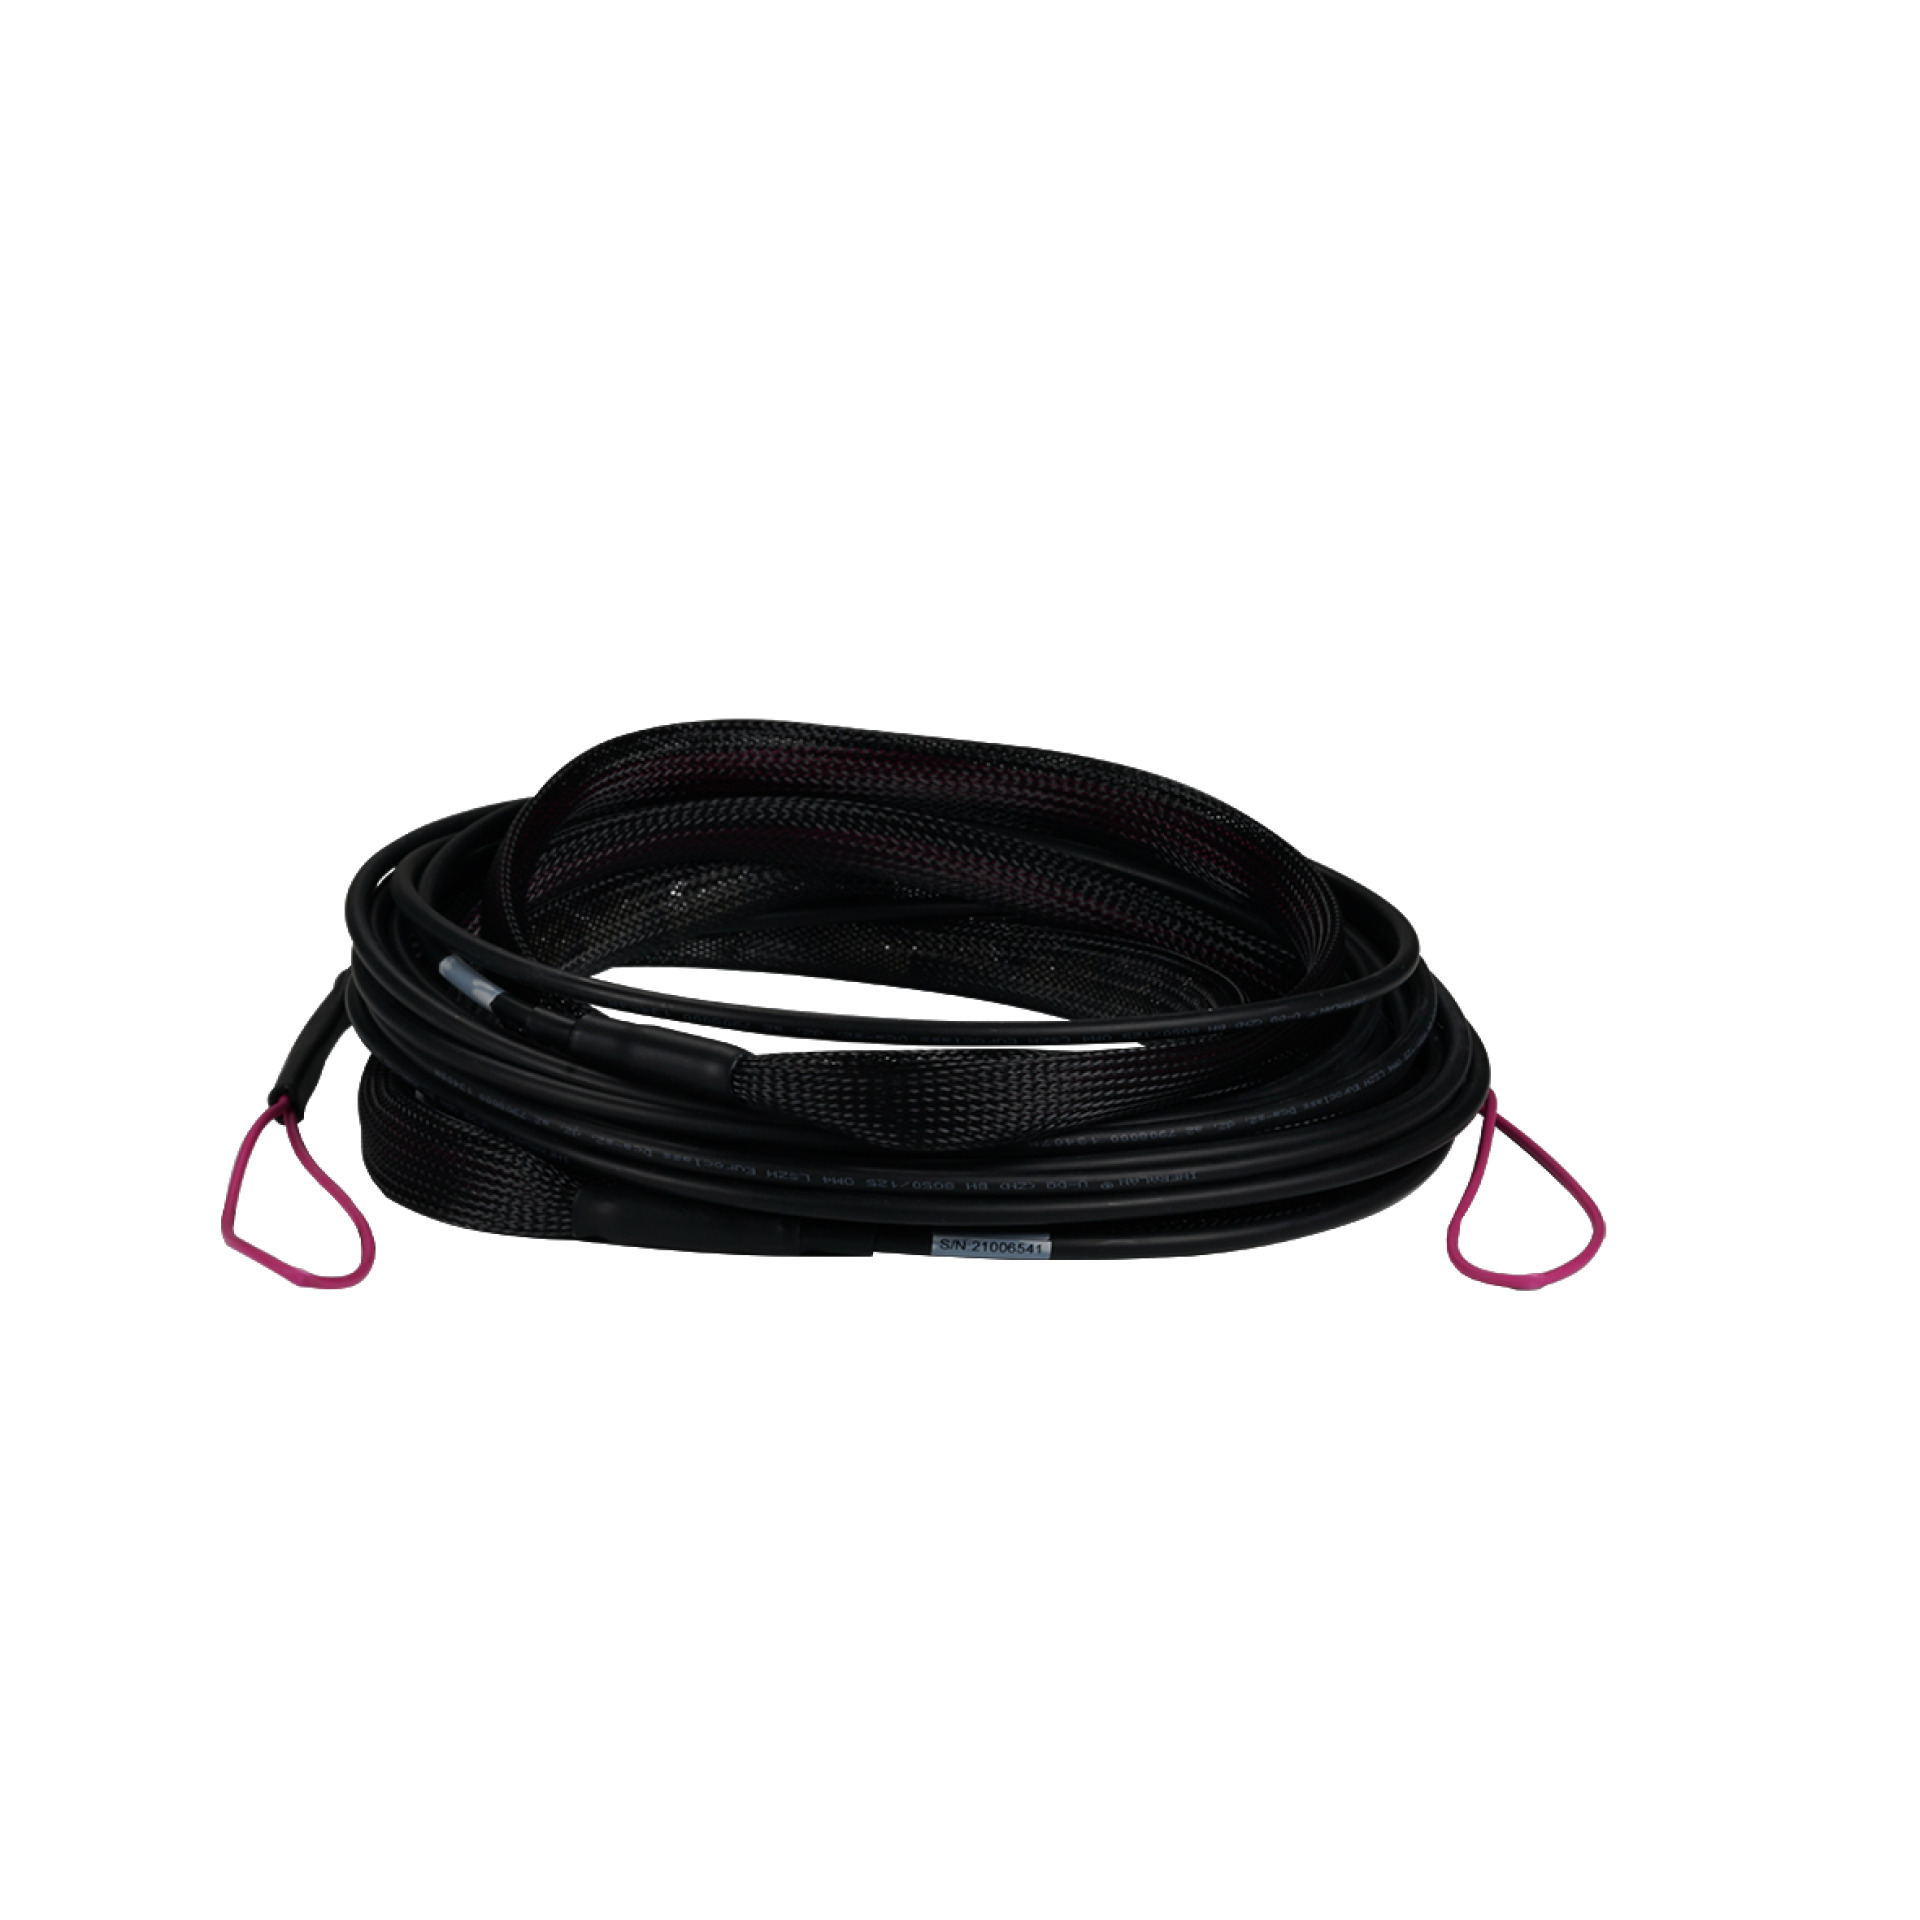 Trunk cable U-DQ(ZN)BH 12G 50/125, SC/SC OM4 70m